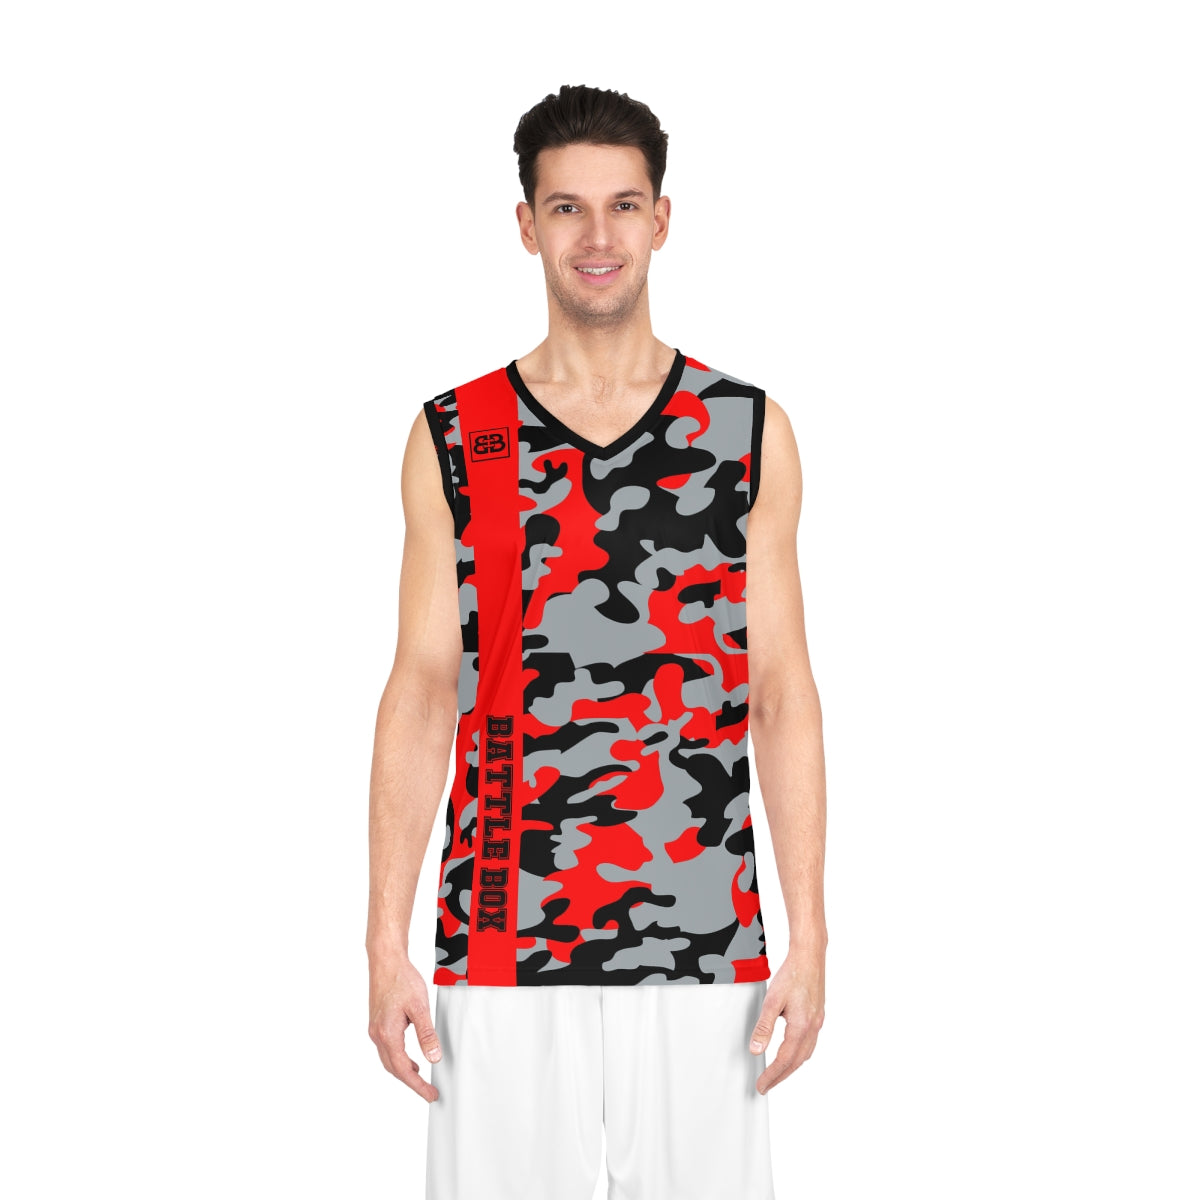 black and red basketball jersey